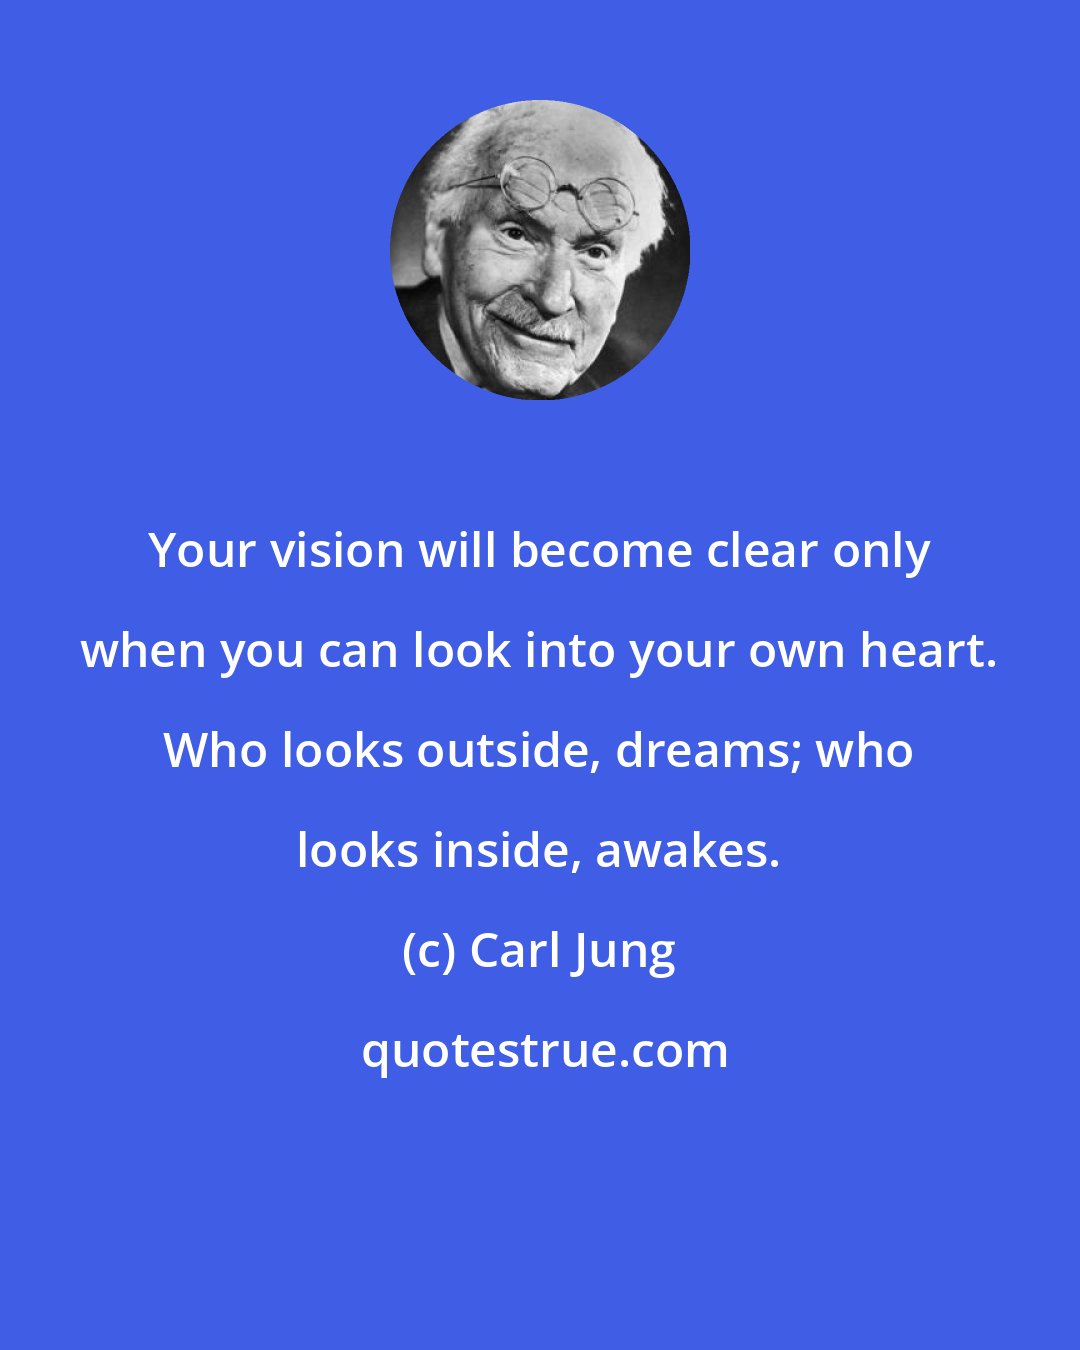 Carl Jung: Your vision will become clear only when you can look into your own heart. Who looks outside, dreams; who looks inside, awakes.